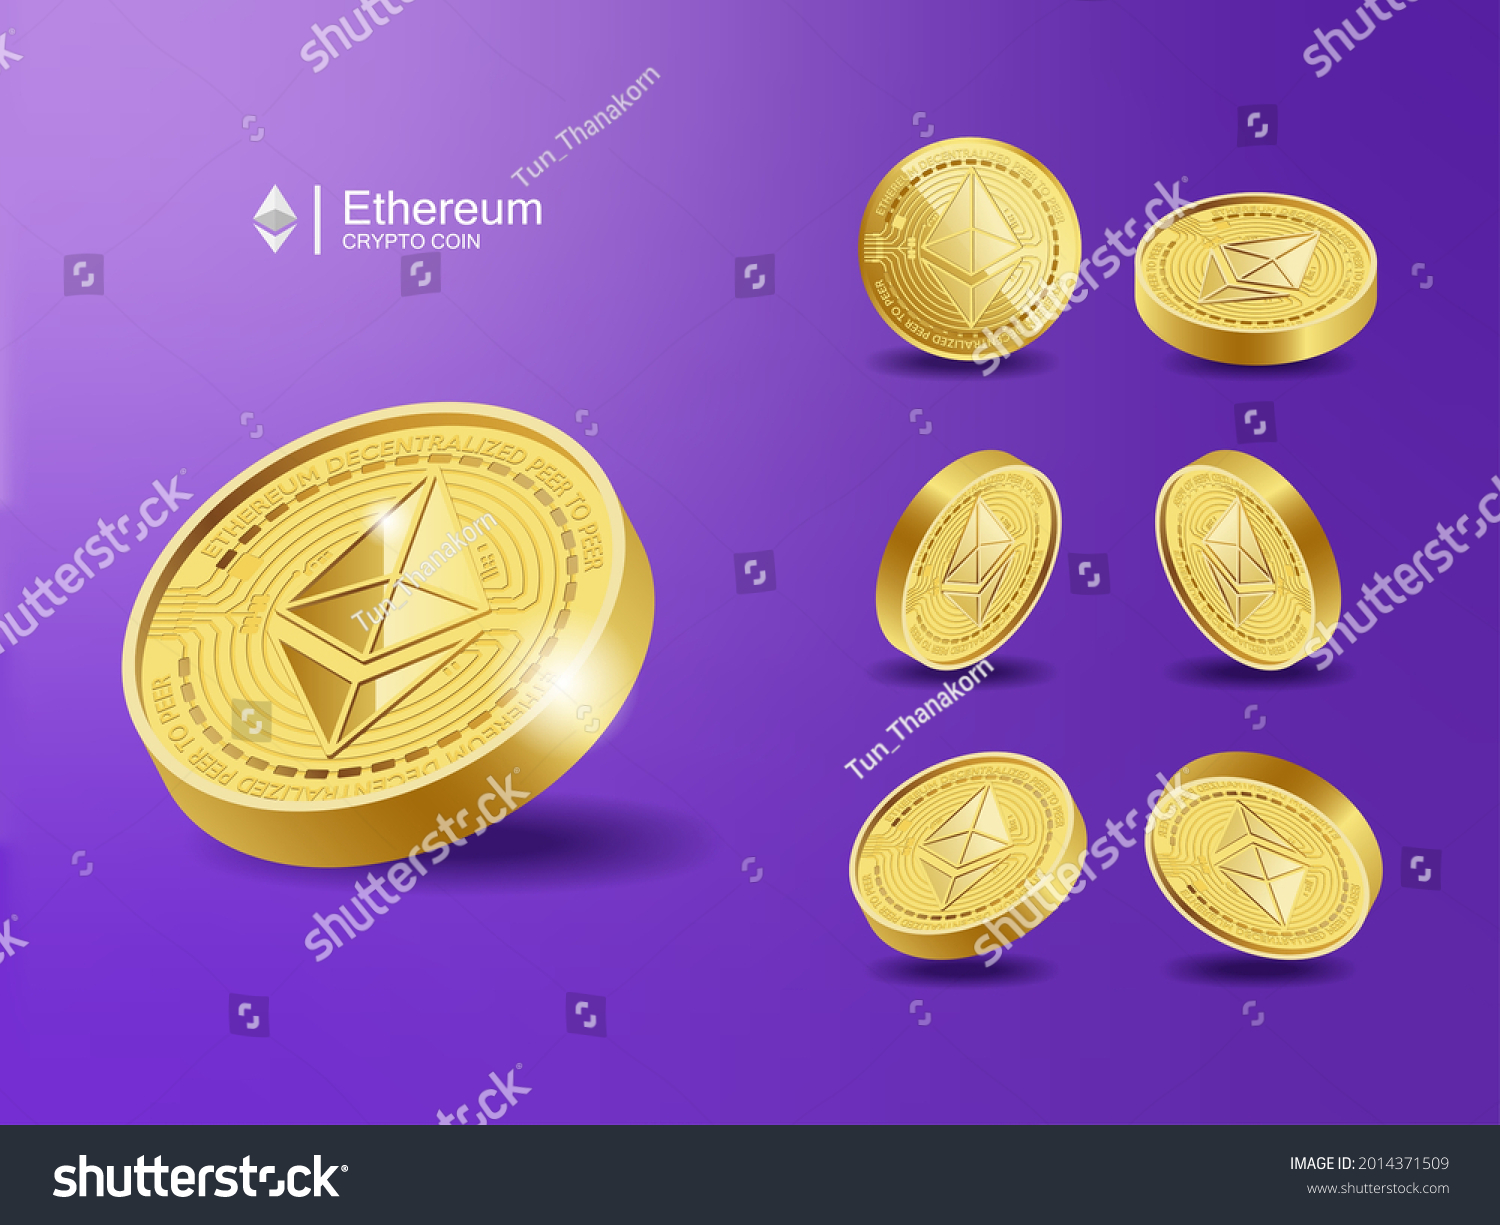 SVG of Ethereum ETH Cryptocurrency Coins. Perspective Illustration about Crypto Coins. svg